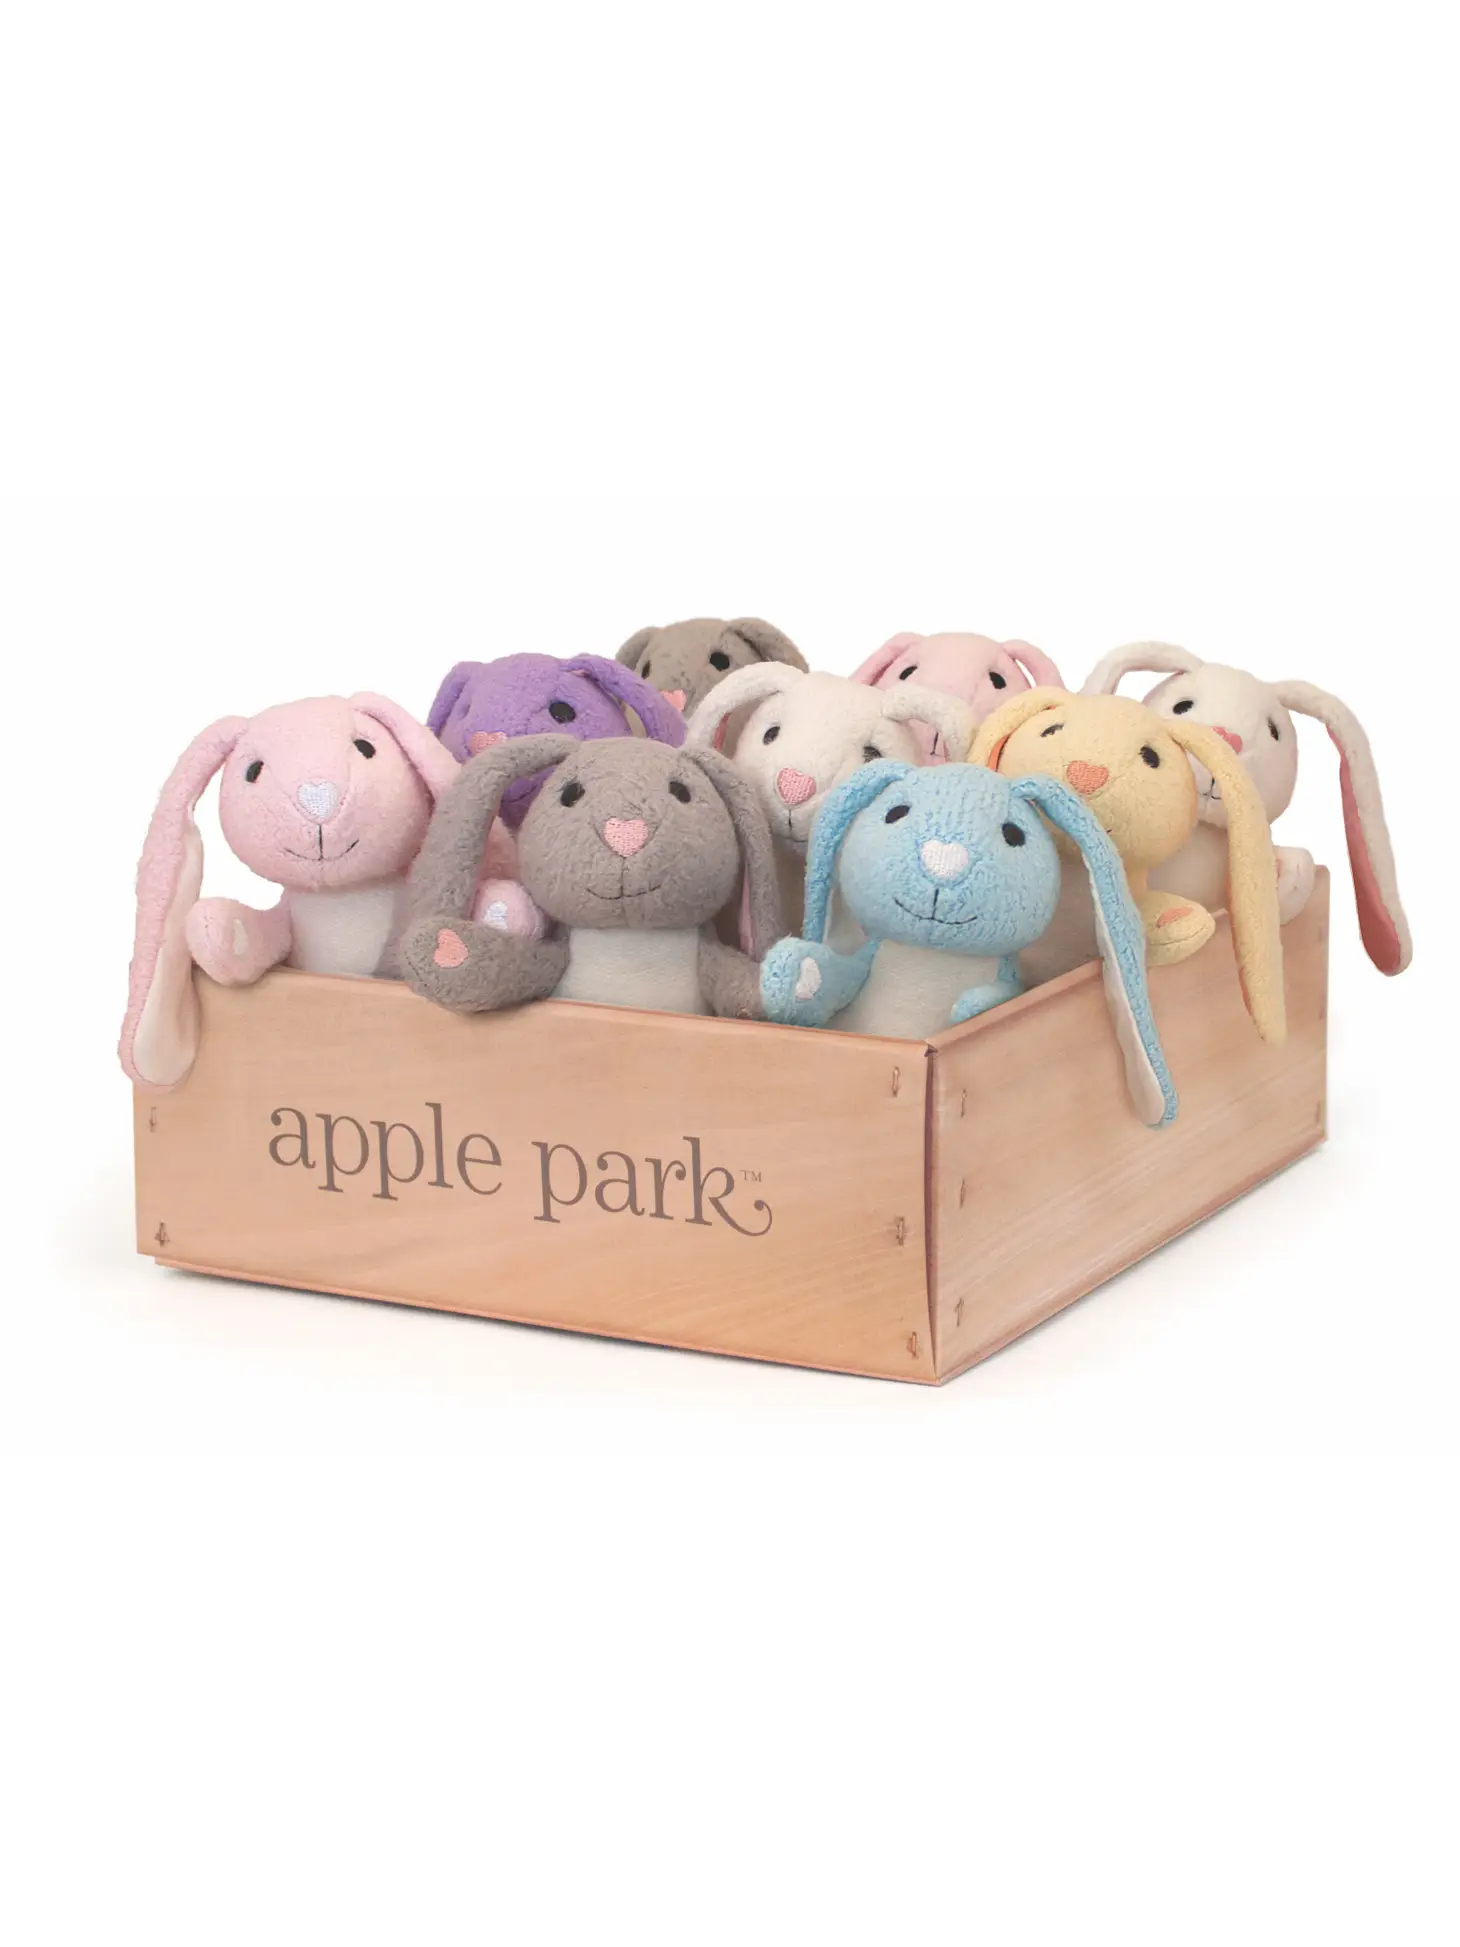 Apple Park Organic Cotton Fuzzy Bunnies from Gimme the Good Stuff